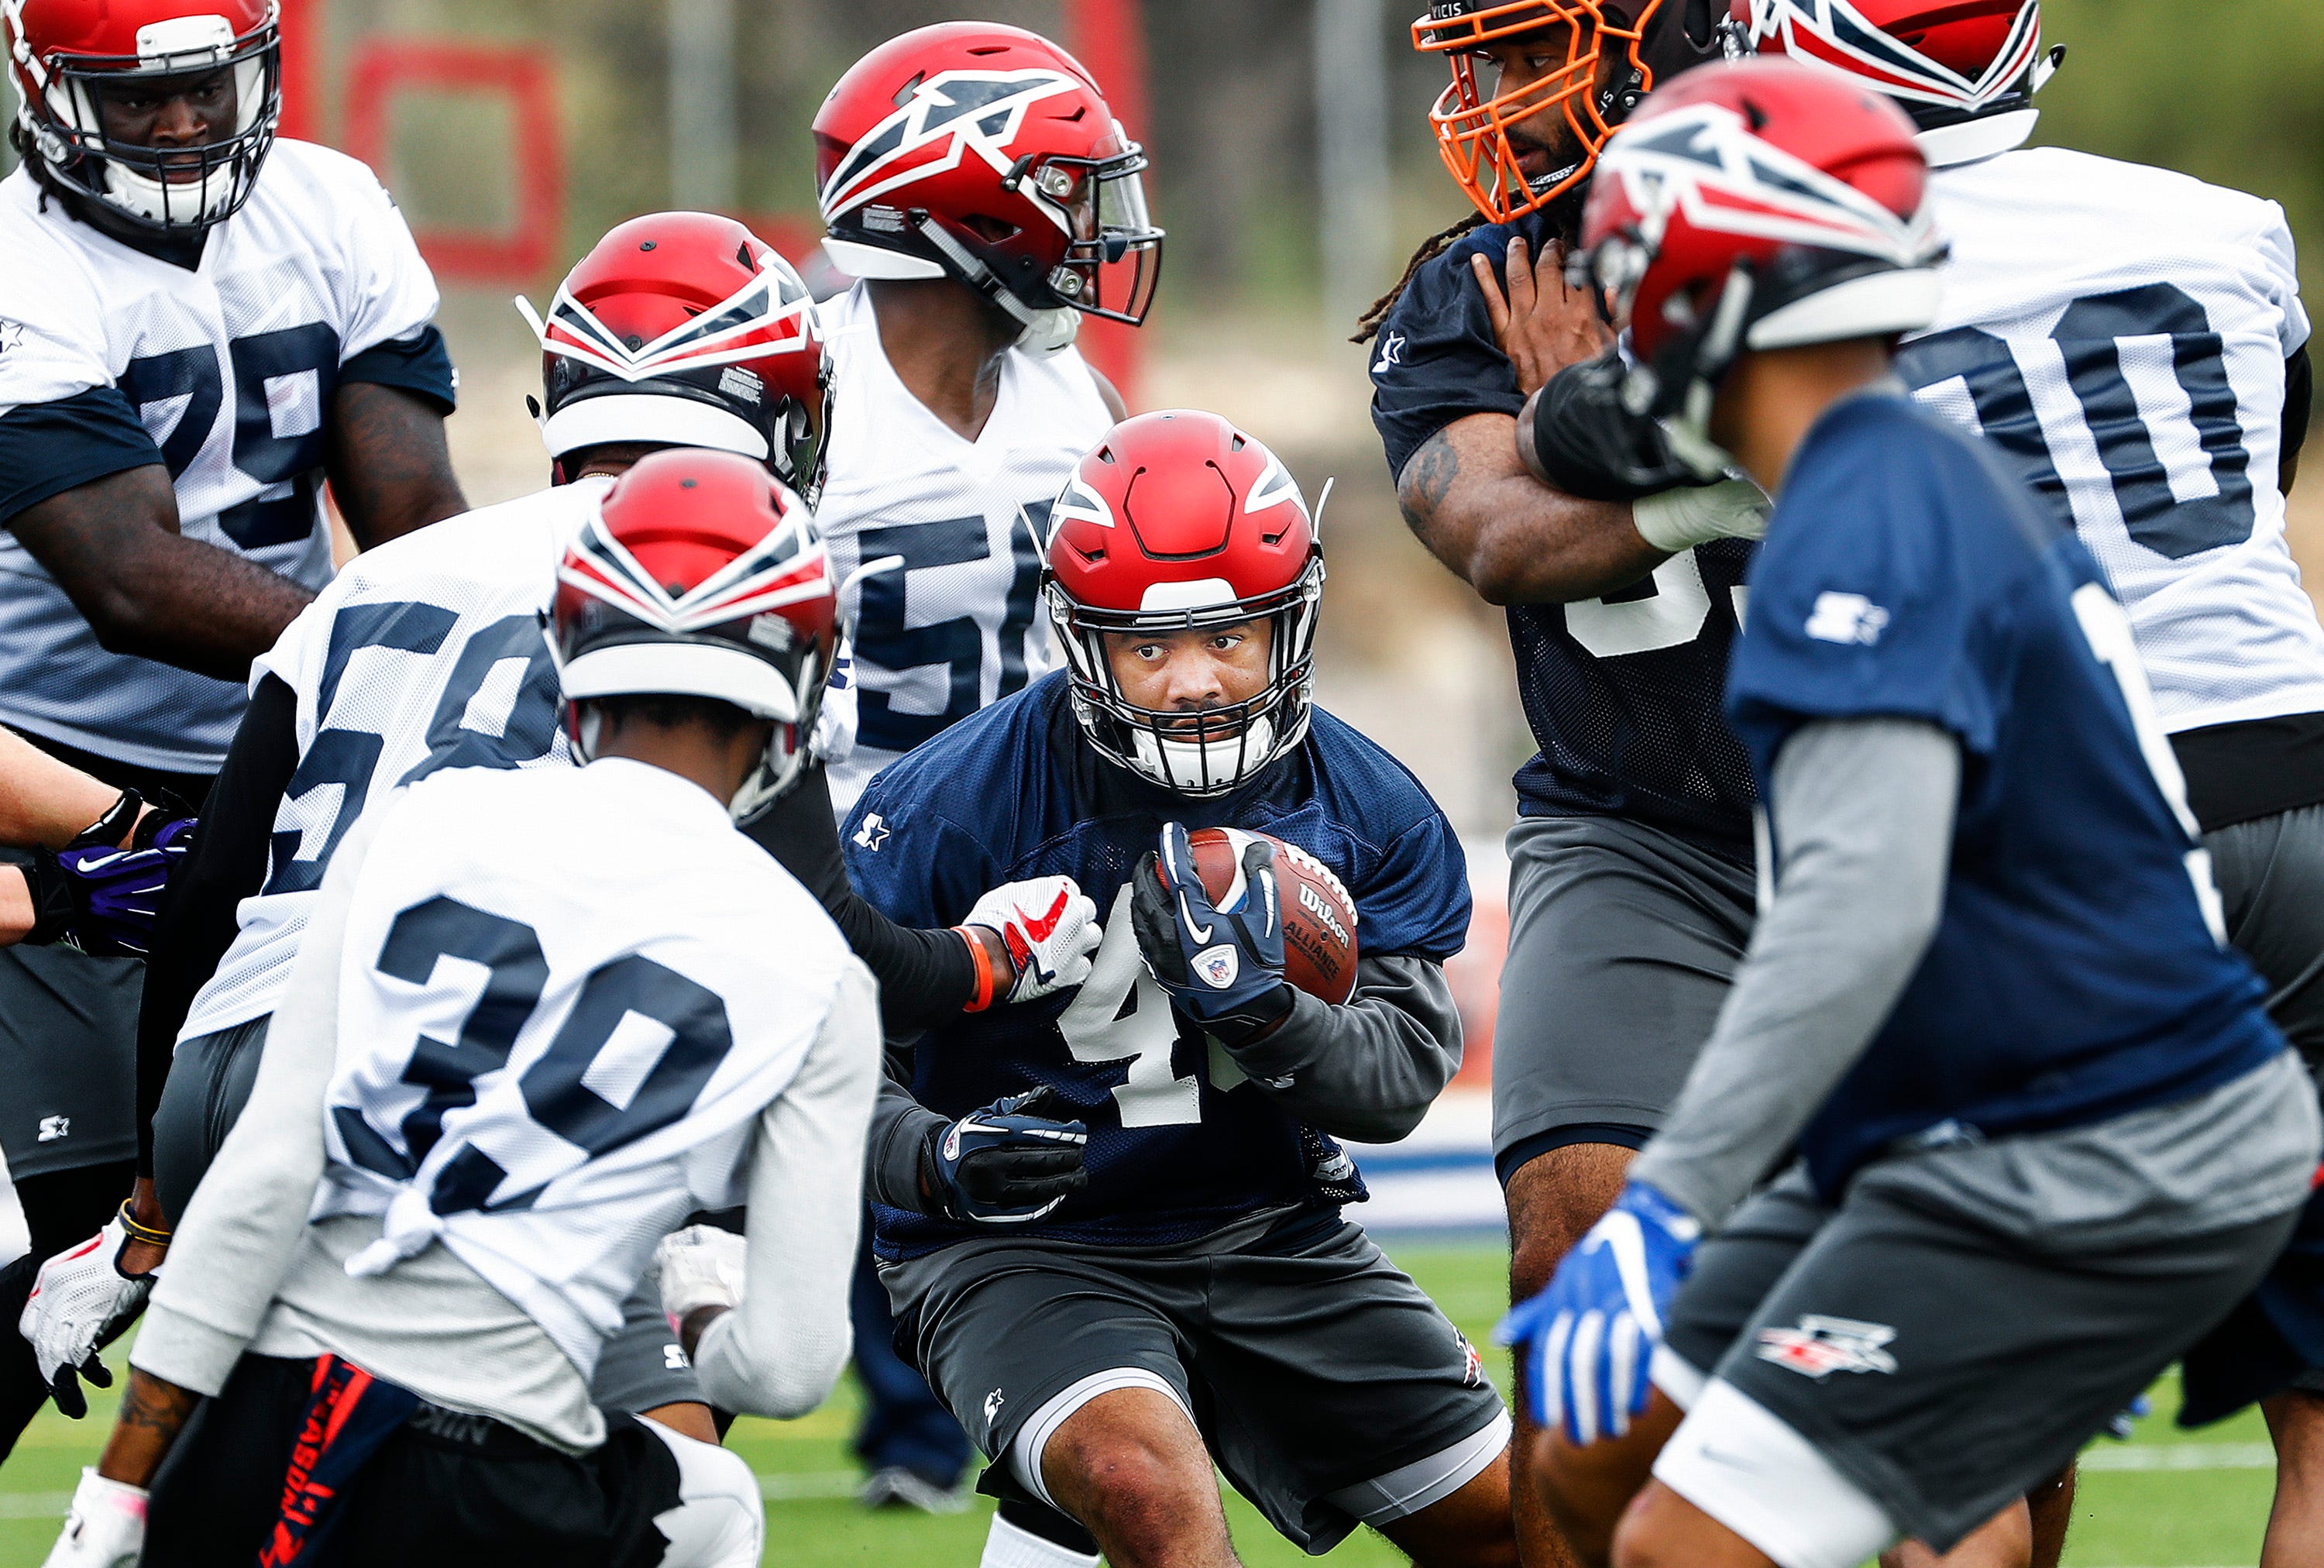 Mike Singletary likes energy, attitude at new AAF's first training camp